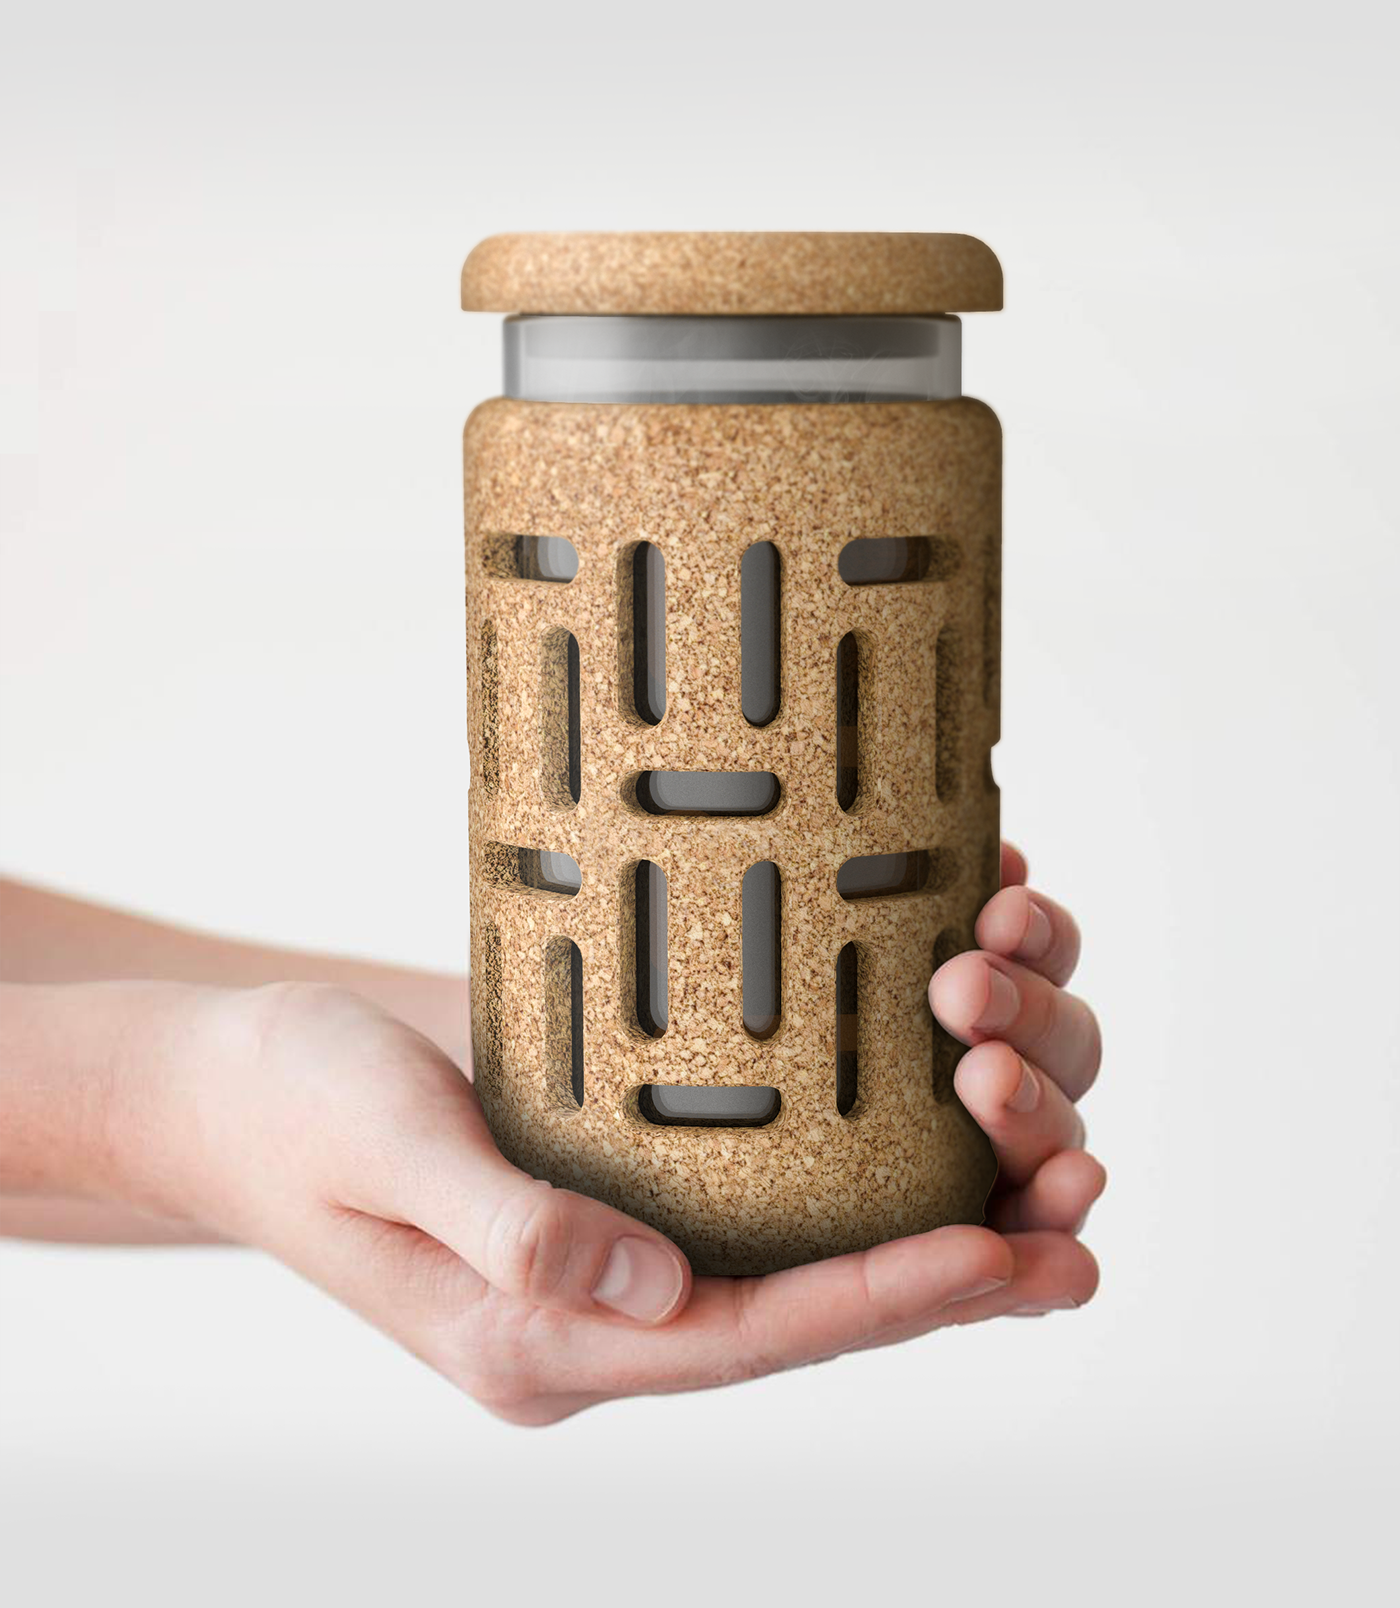 Coffee cork cup concrete Nantes contest cafe product thermos